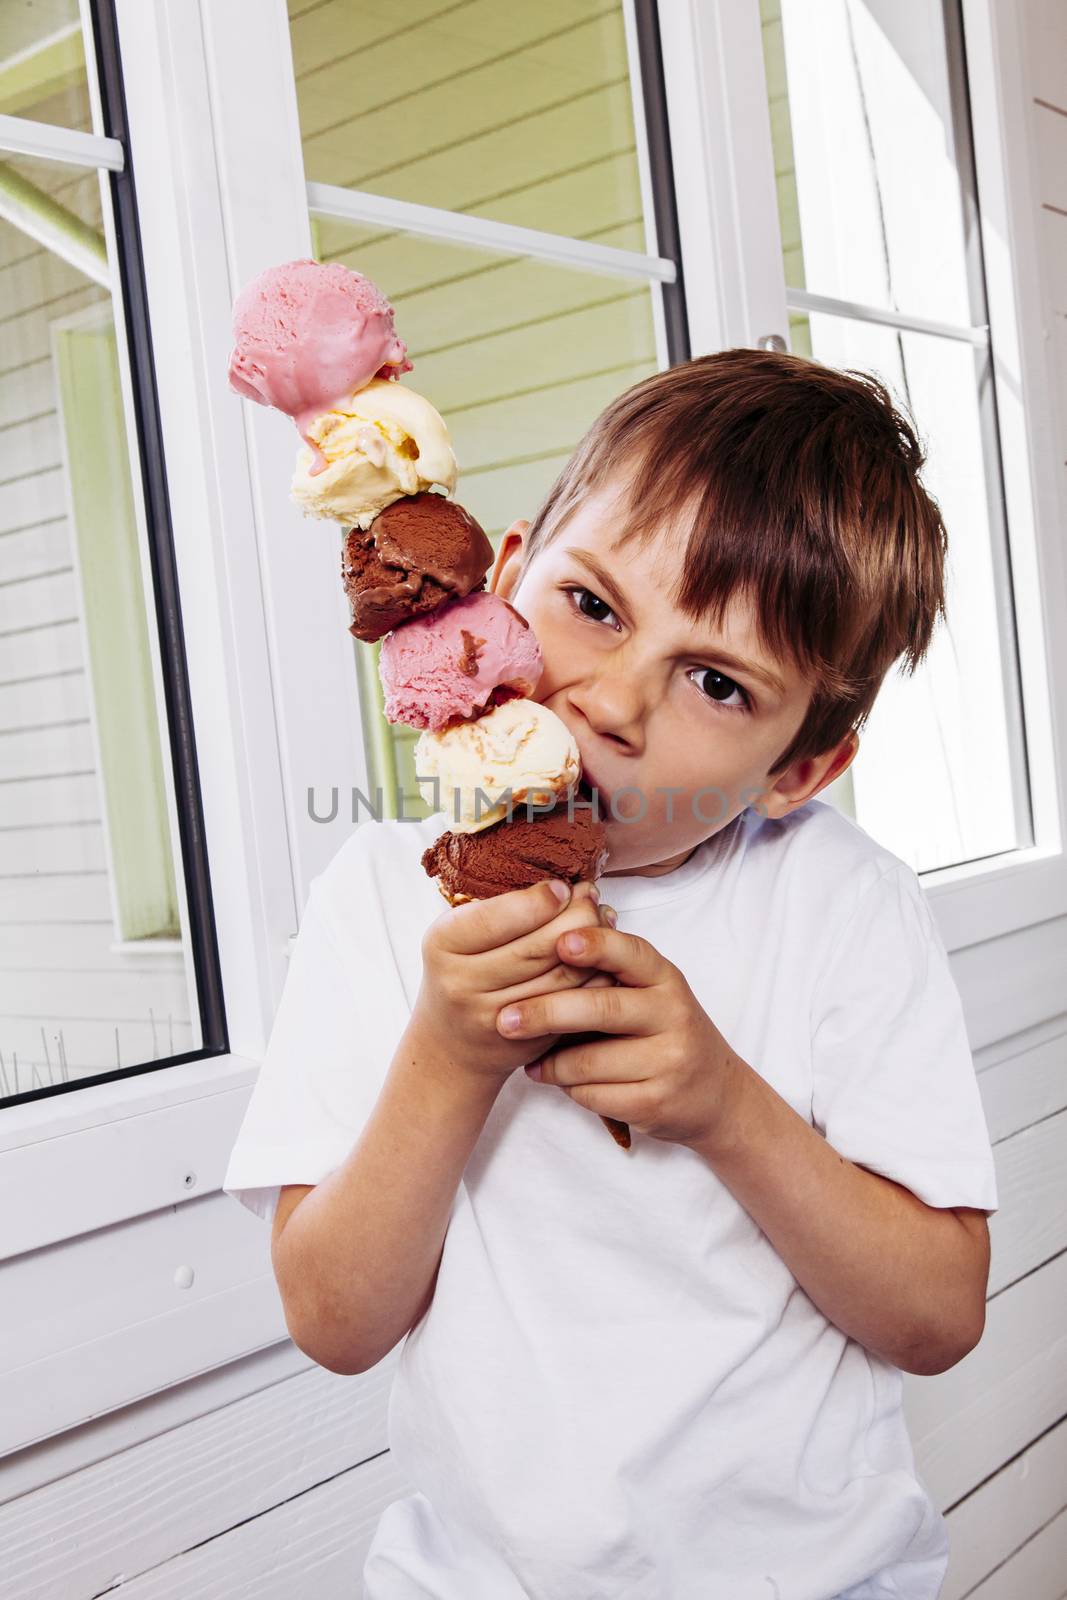 Boy eating a tall ice cream cone by sumners